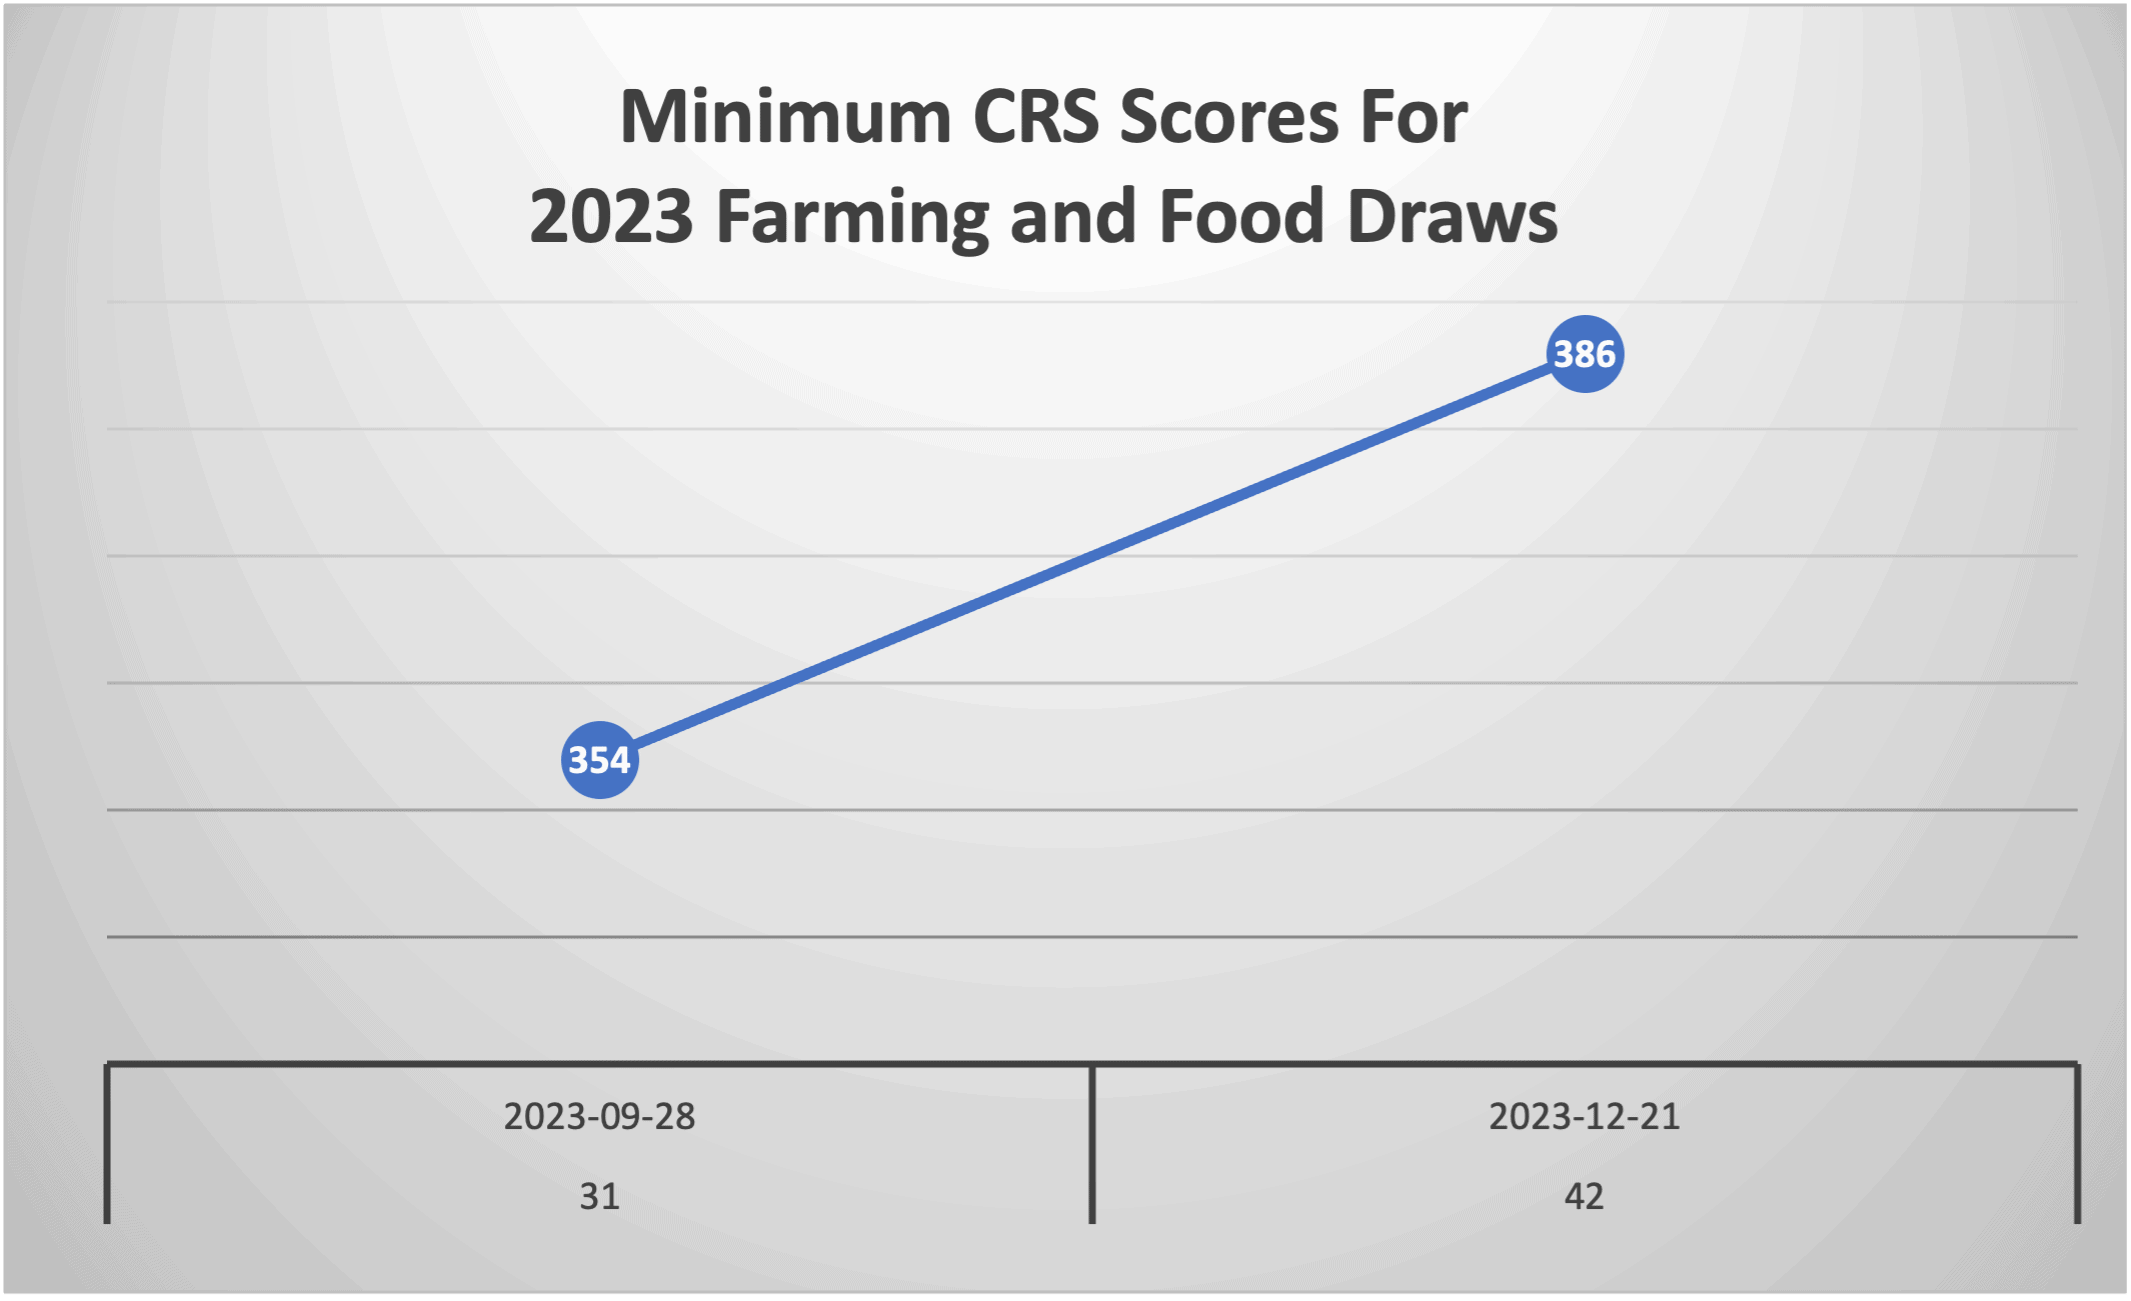 Minimum CRS Scores For 2023 Farming and Food Draws